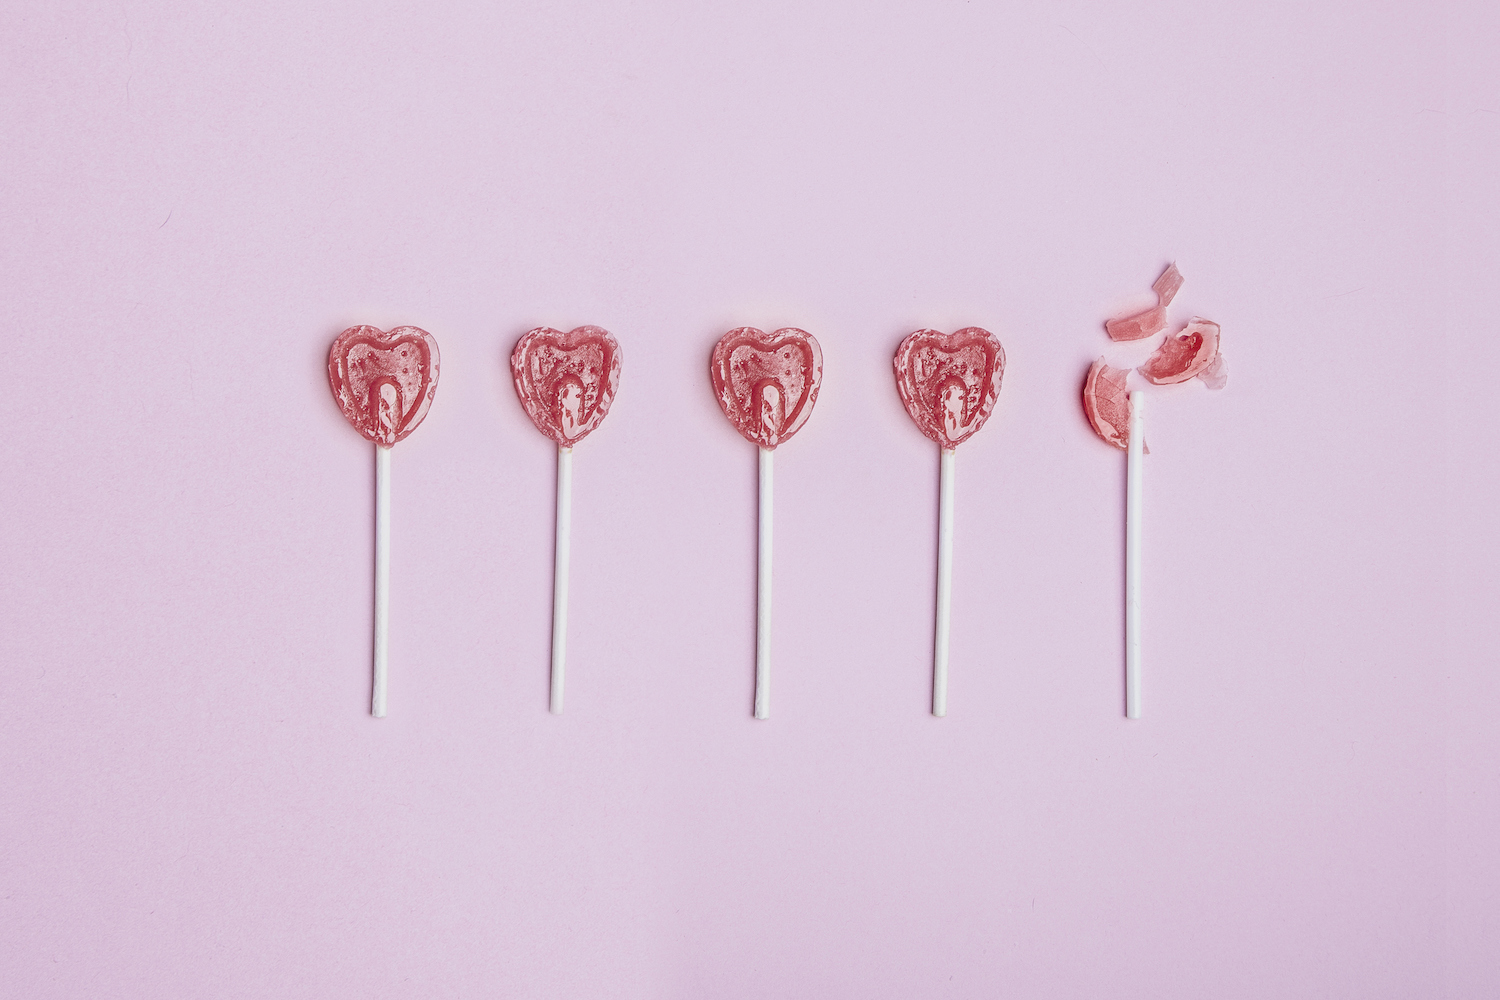 There are five heart-shaped lollipops on the pink floor, but the last heart is broken.